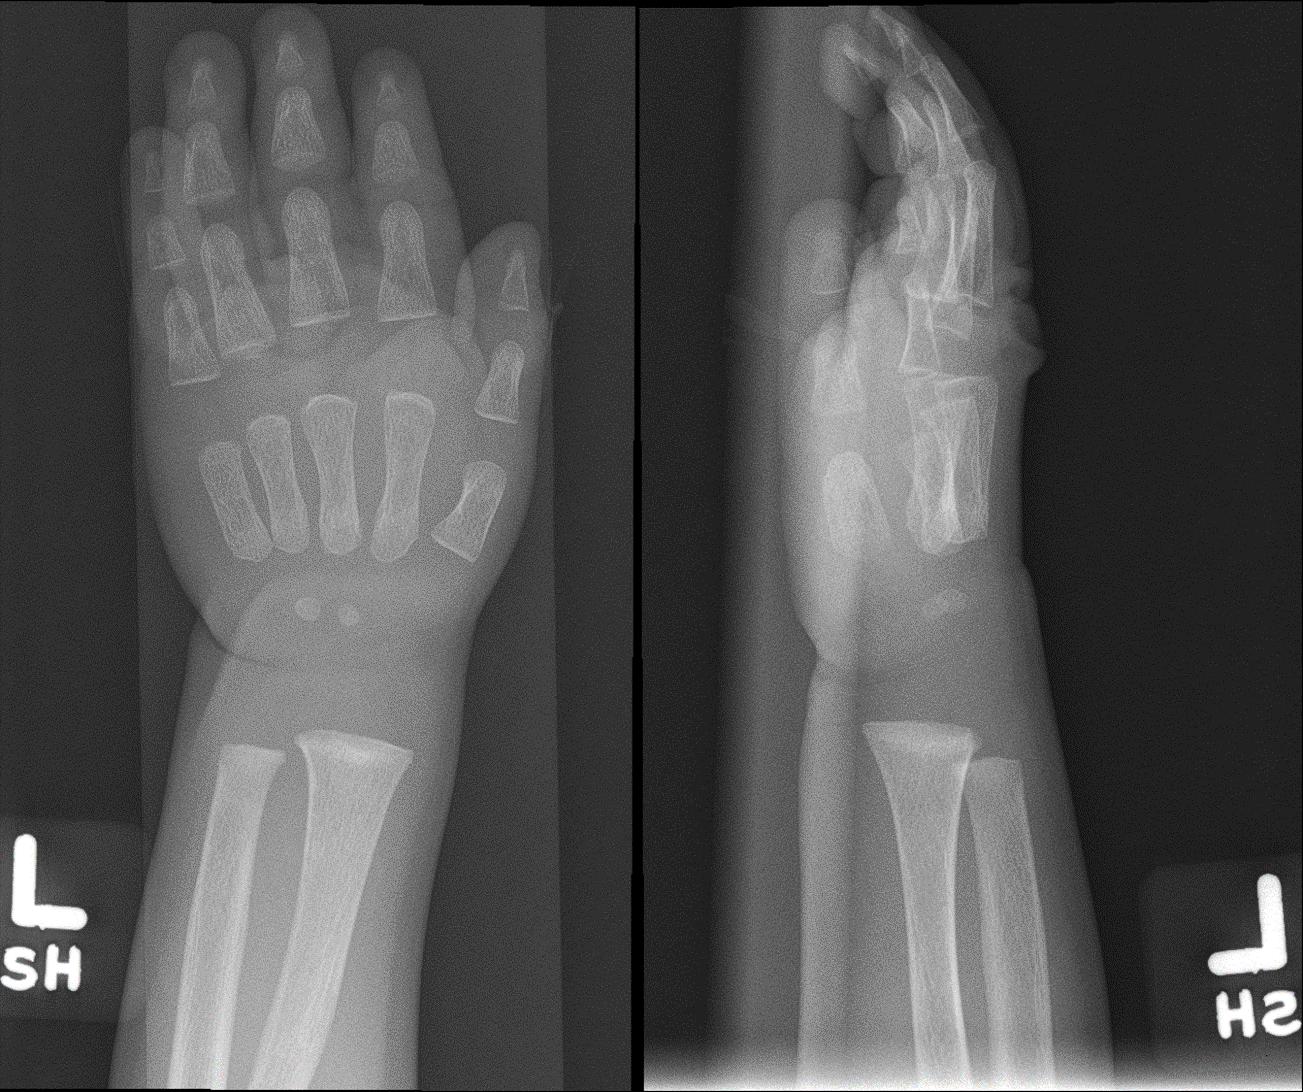 Radiograph of the left wrist (anteroposterior and lateral views) taken three months later showing improved density and appearance of the distal metaphysis after initiation of treatment for rickets